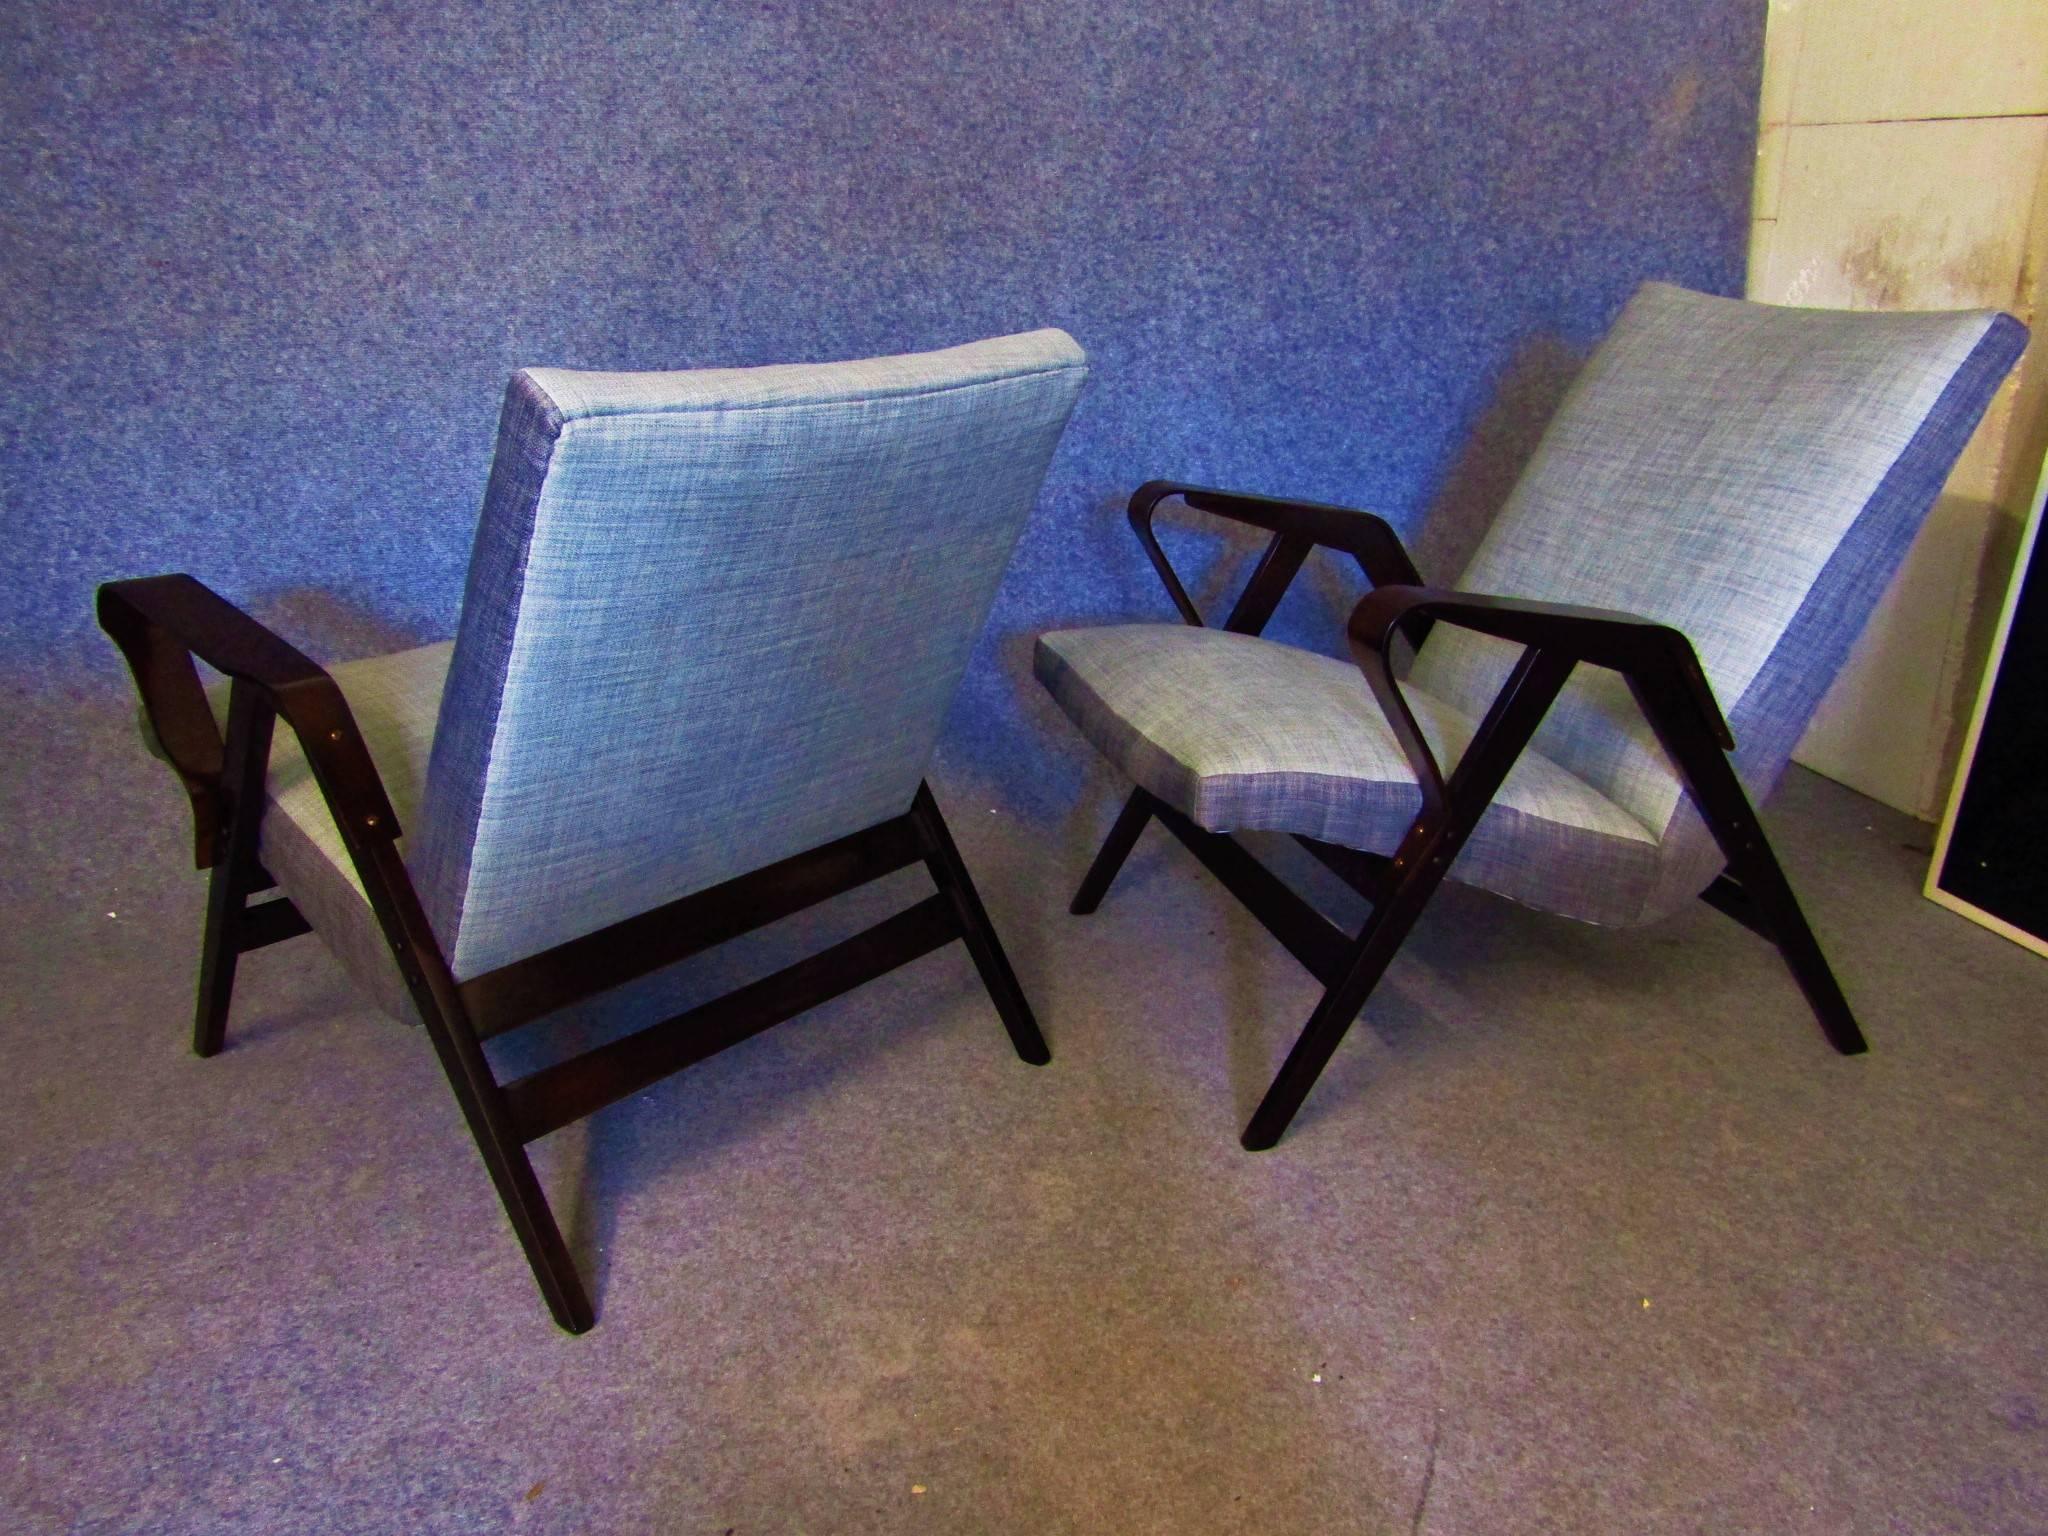 Midcentury Pair of Bent-Ply Armchairs by Tatra Nabytok, Czech, 1950s For Sale 3